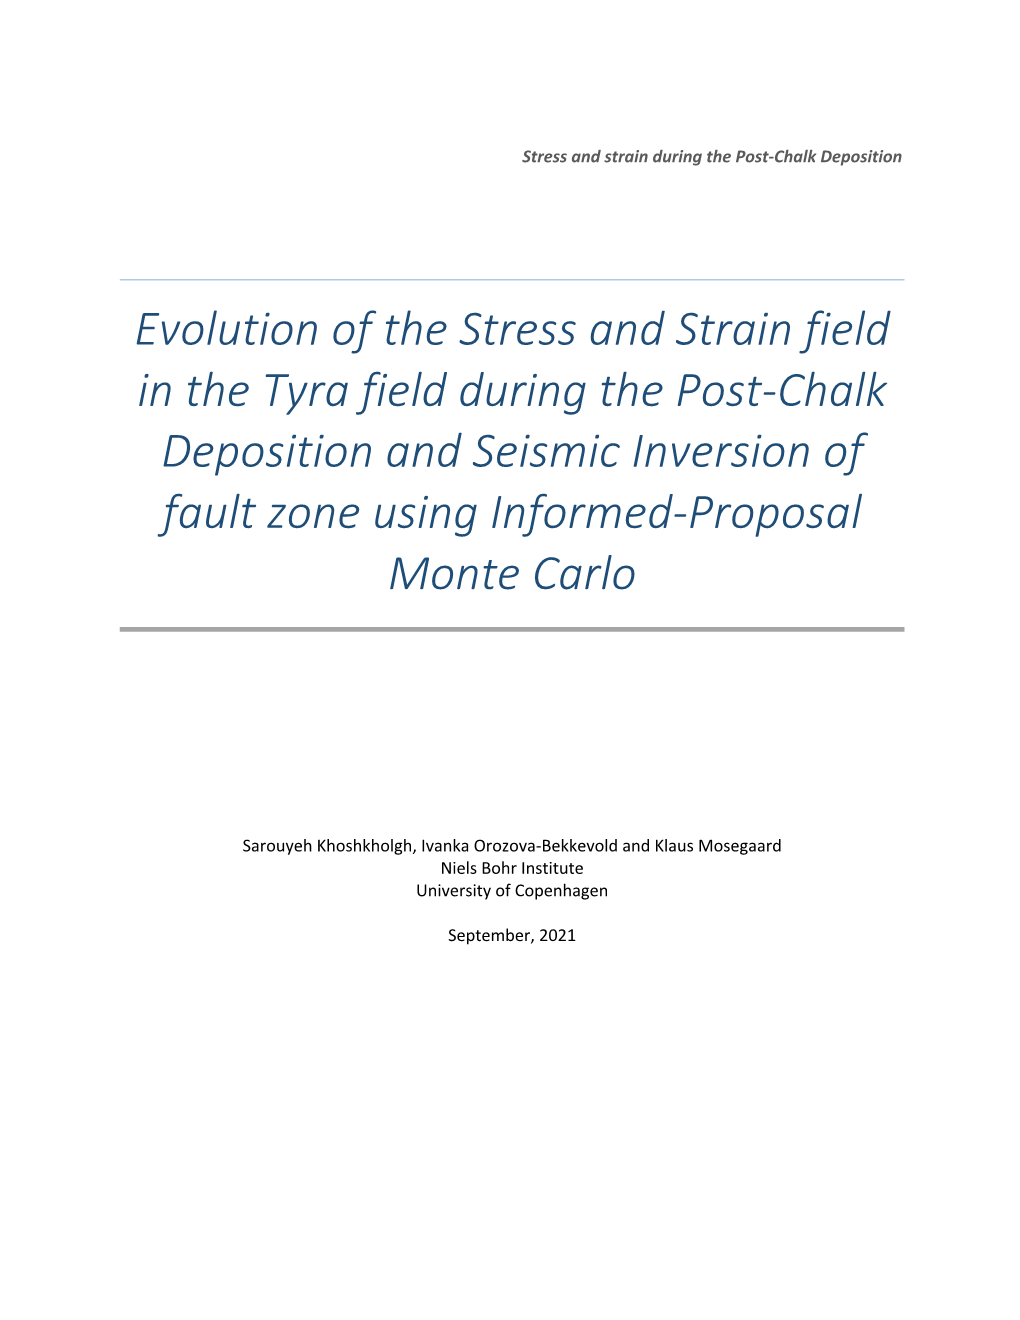 Evolution of the Stress and Strain Field in the Tyra Field During the Post-Chalk Deposition and Seismic Inversion of Fault Zone Using Informed-Proposal Monte Carlo